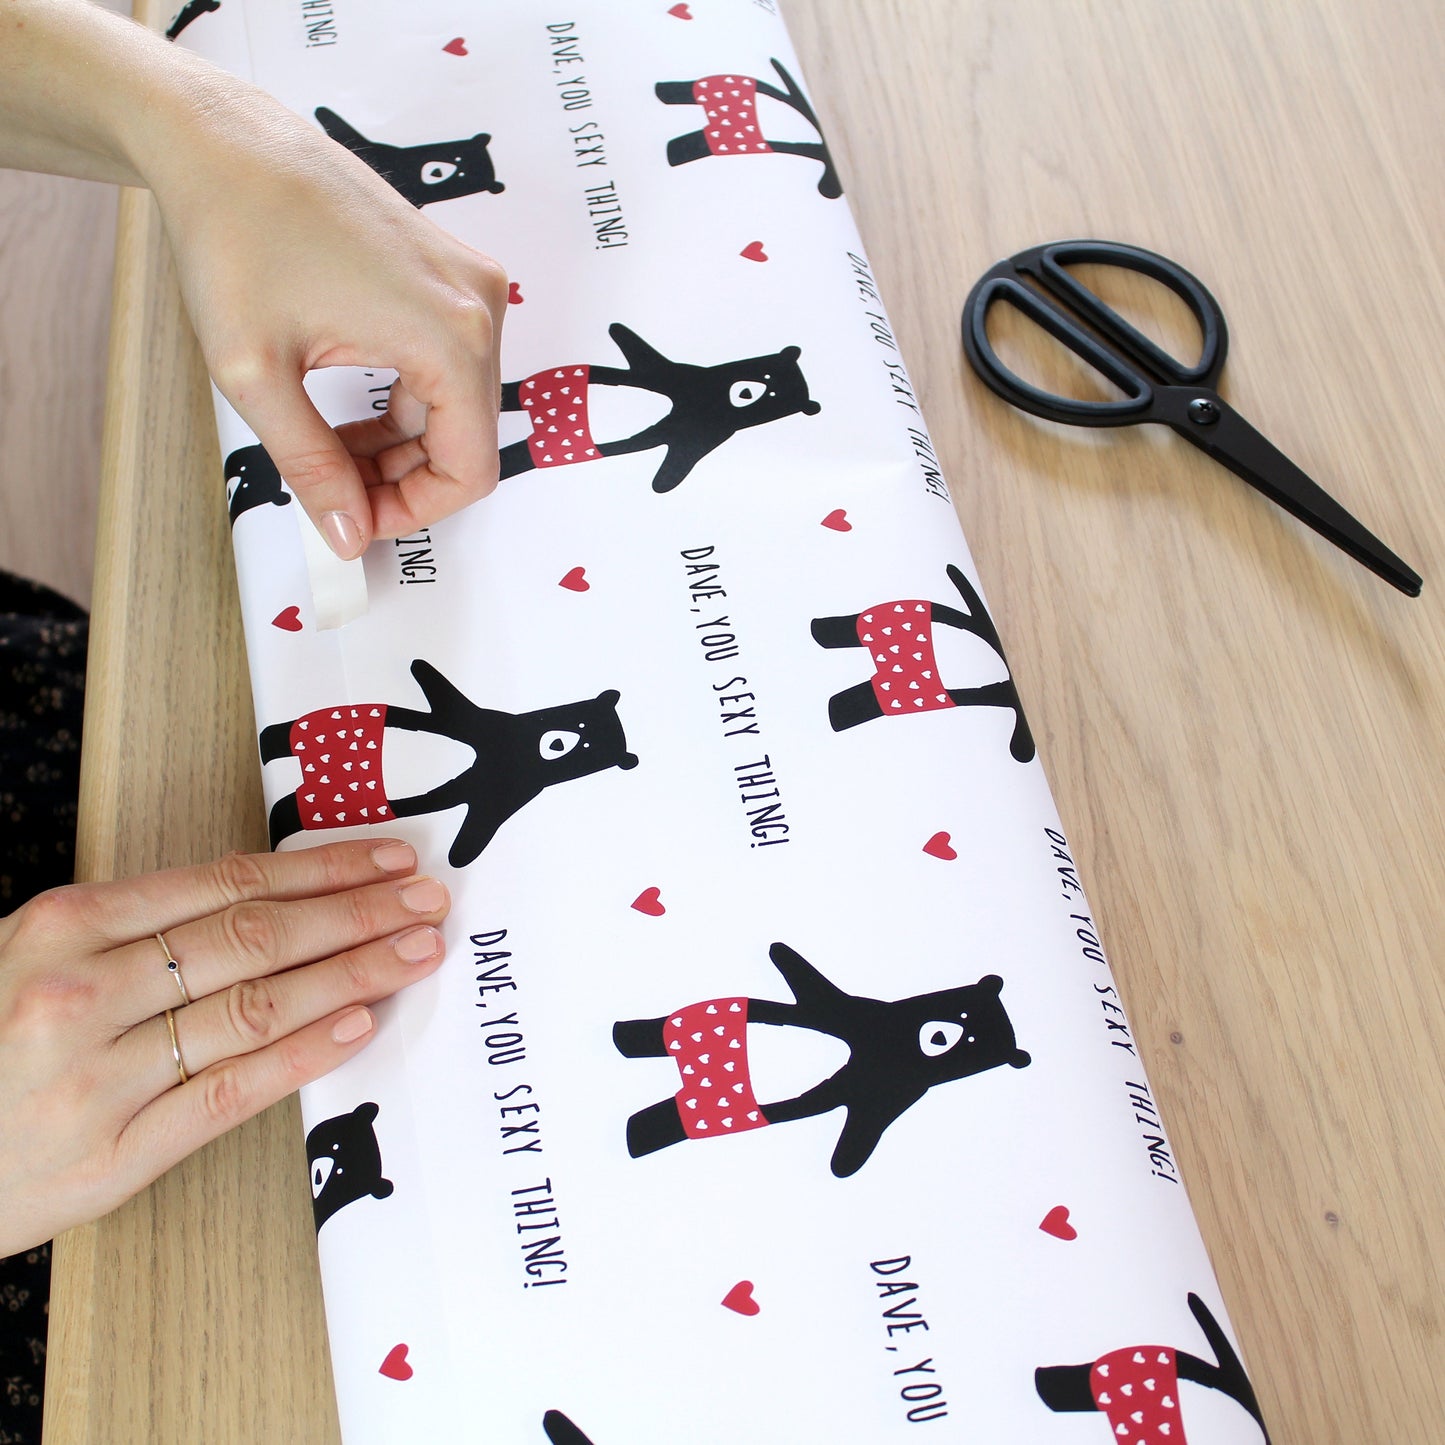 Personalised Sexy Thing Bear Wrapping Paper